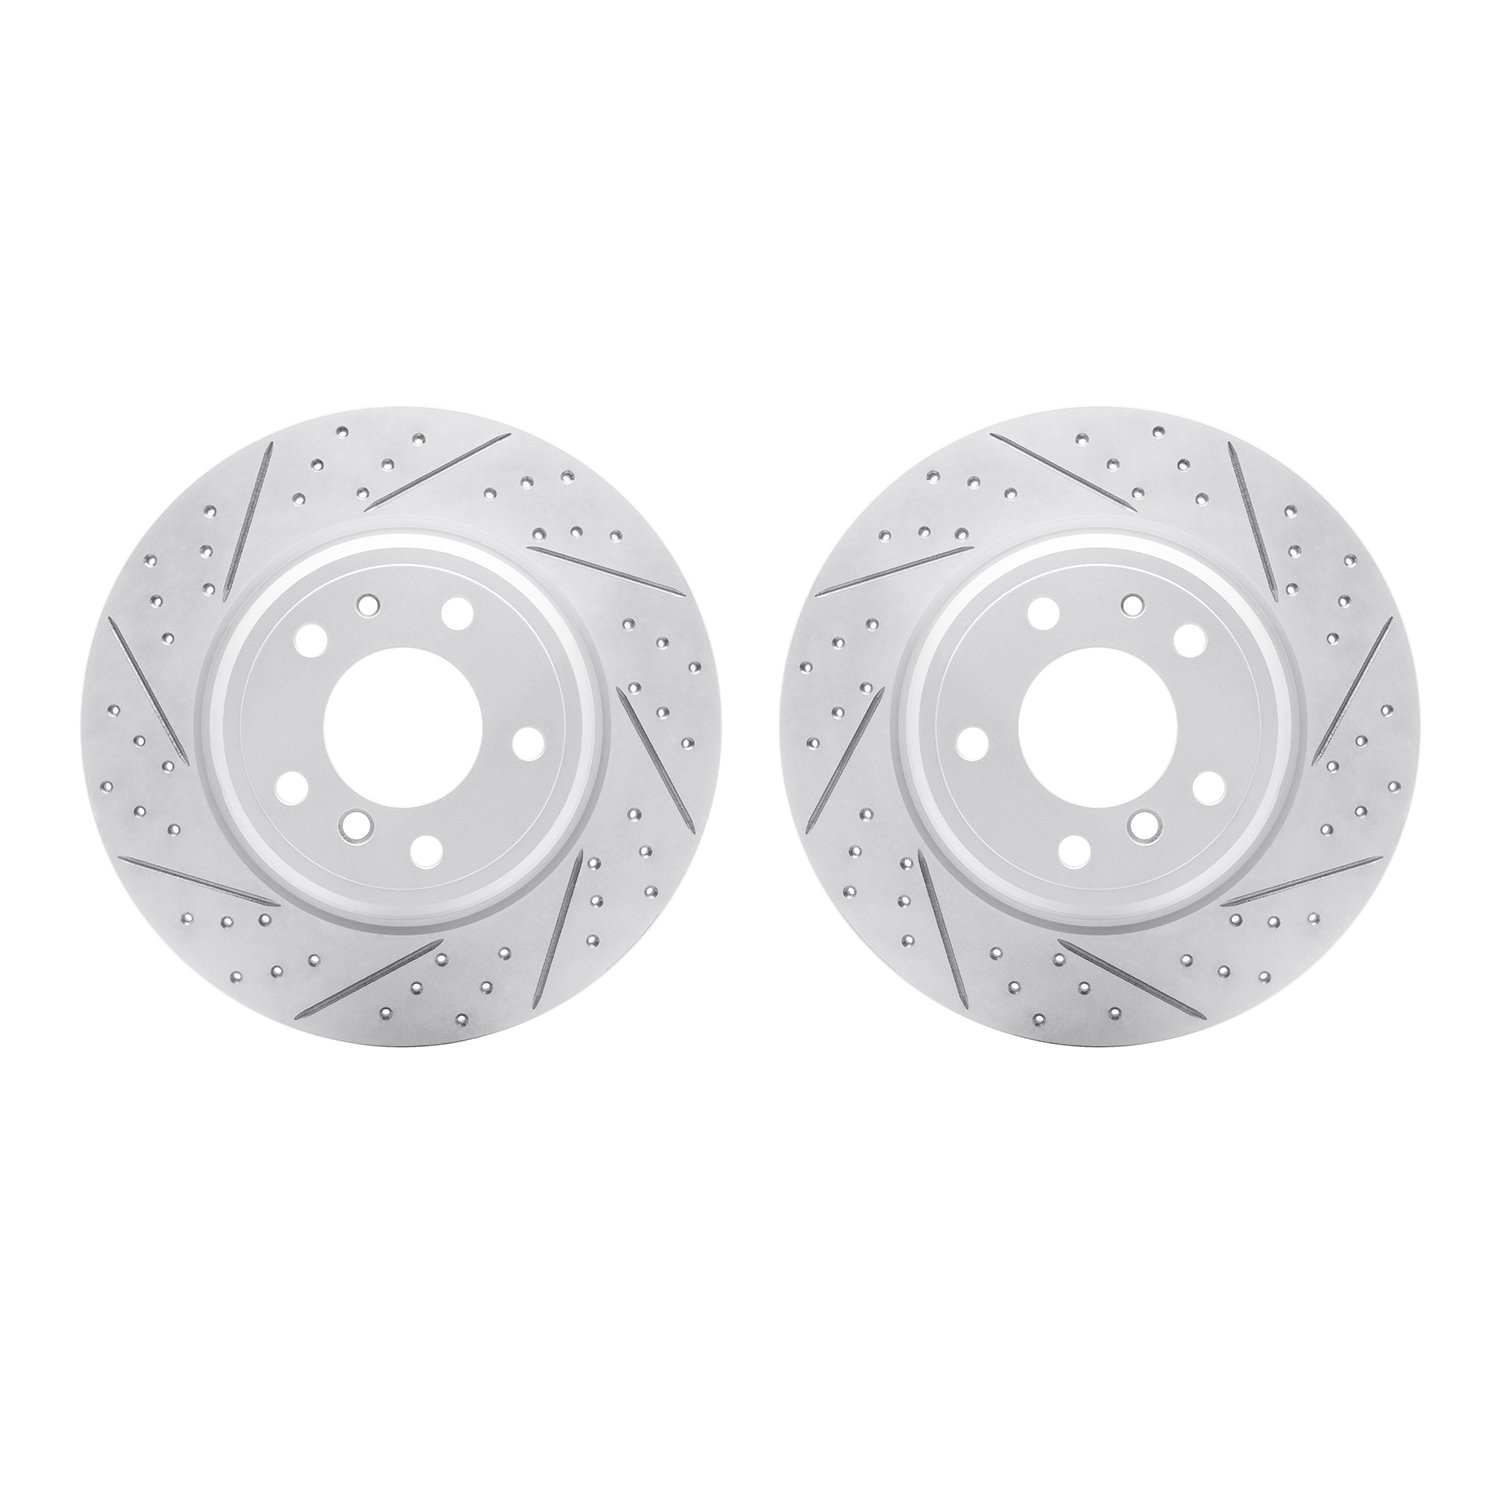 2002-31081 Geoperformance Drilled/Slotted Brake Rotors, 1991-2001 BMW, Position: Rear